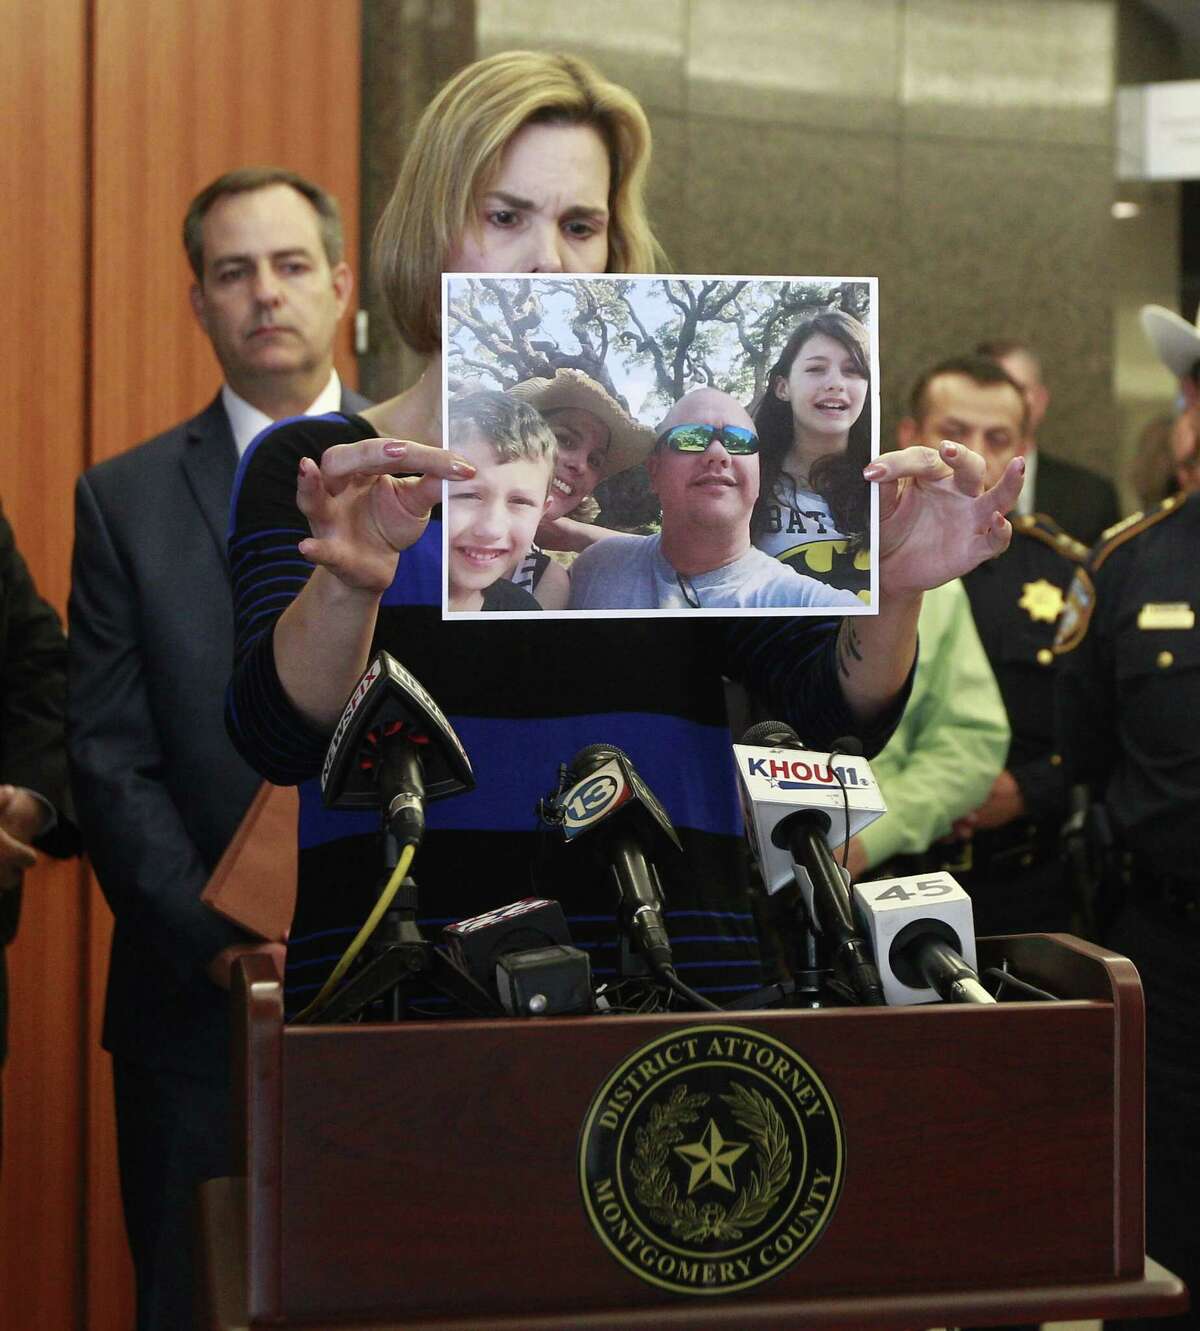 Kathleen Goforth, widow of Harris County SheriffÂ?’s Deputy Darren Goforth, shows photos of her family during a press conference at the Harris County Civil Courthouse, Wednesday, Sept. 13, 2017, in Houston. Shannon Miles, 32, pleaded guilty to capital murder and was sentenced to life without parole for fatally shooting her husband on Aug. 28, 2015, as he was filling up his patrol car at a gas station in Northeast Harris County.